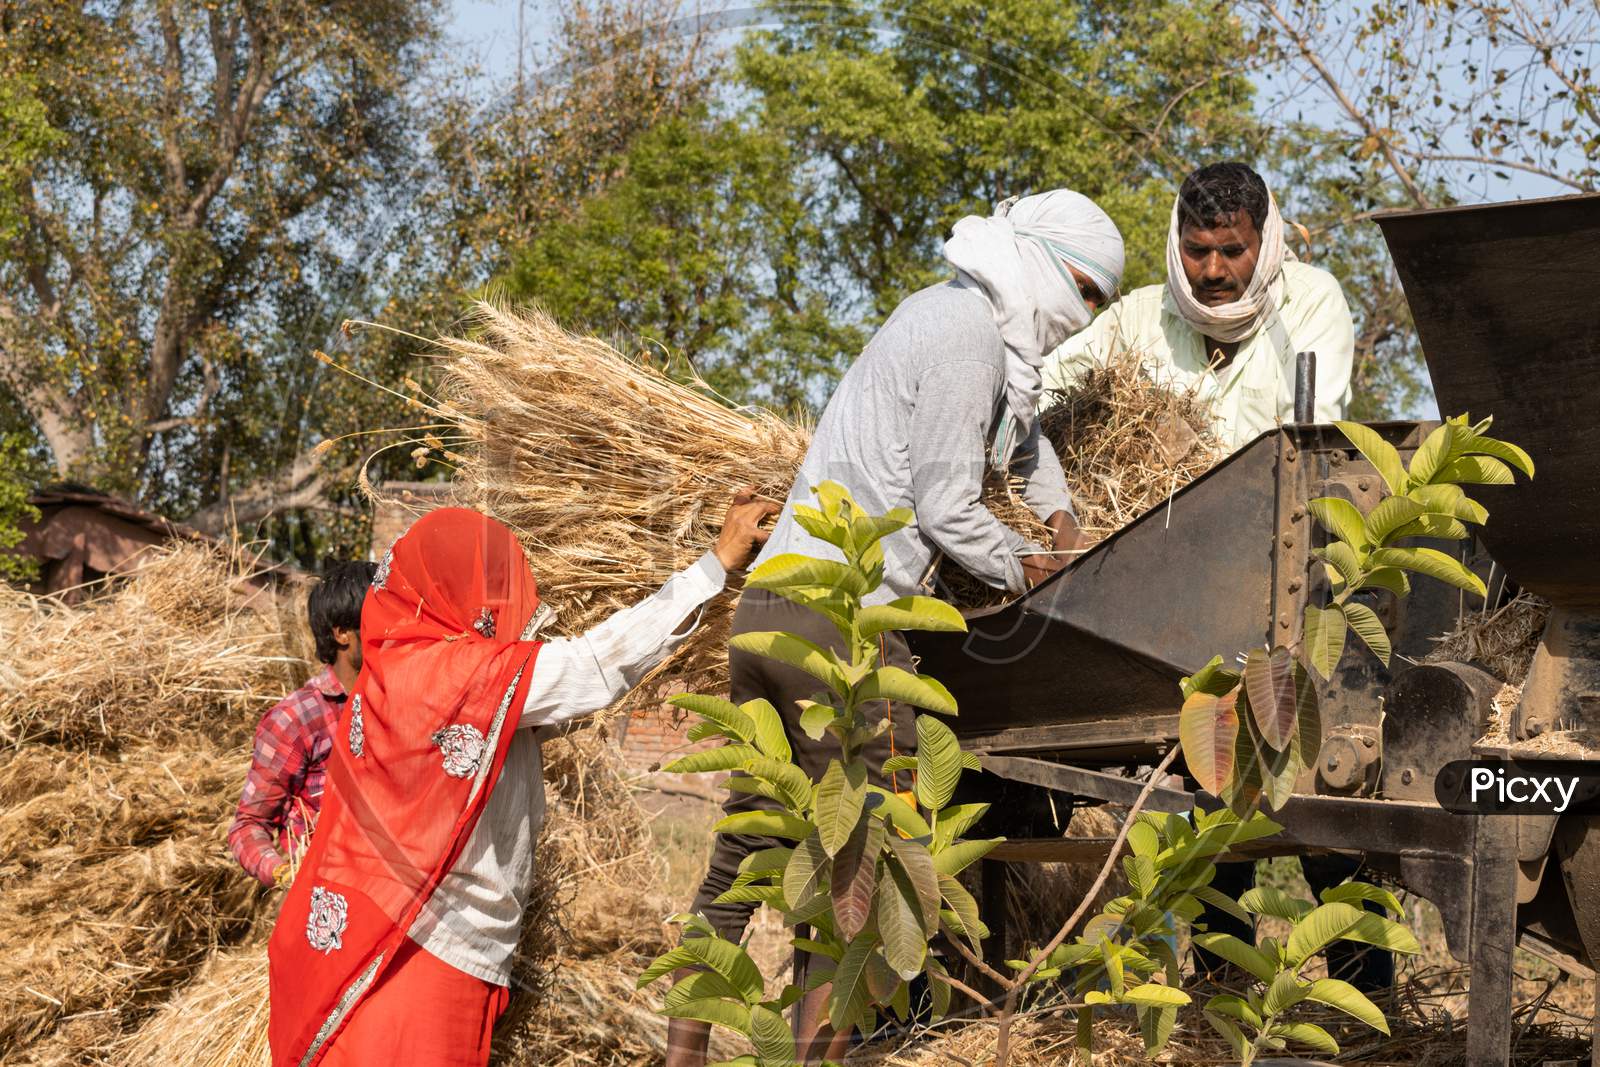 Indian Farmers in a village use threshing machine after harvesting of wheat crop